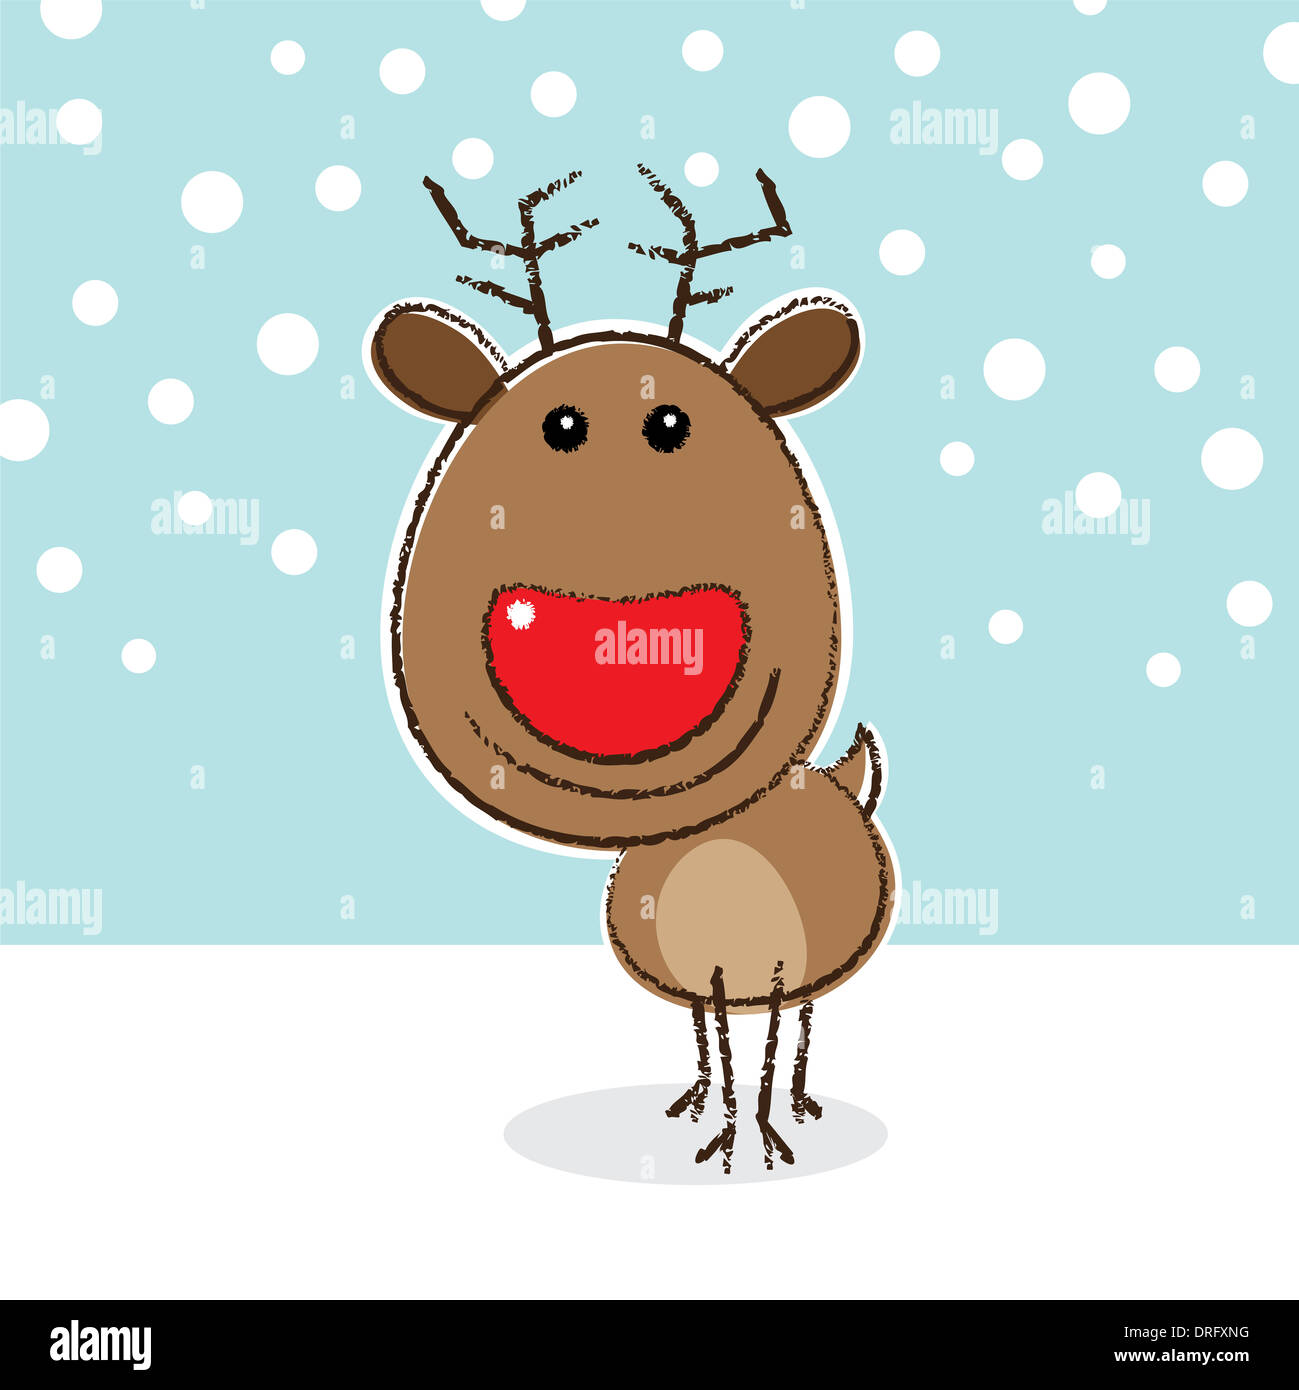 Rudolph the Red Nosed Reindeer Smiling on a Snowy Background Stock Photo